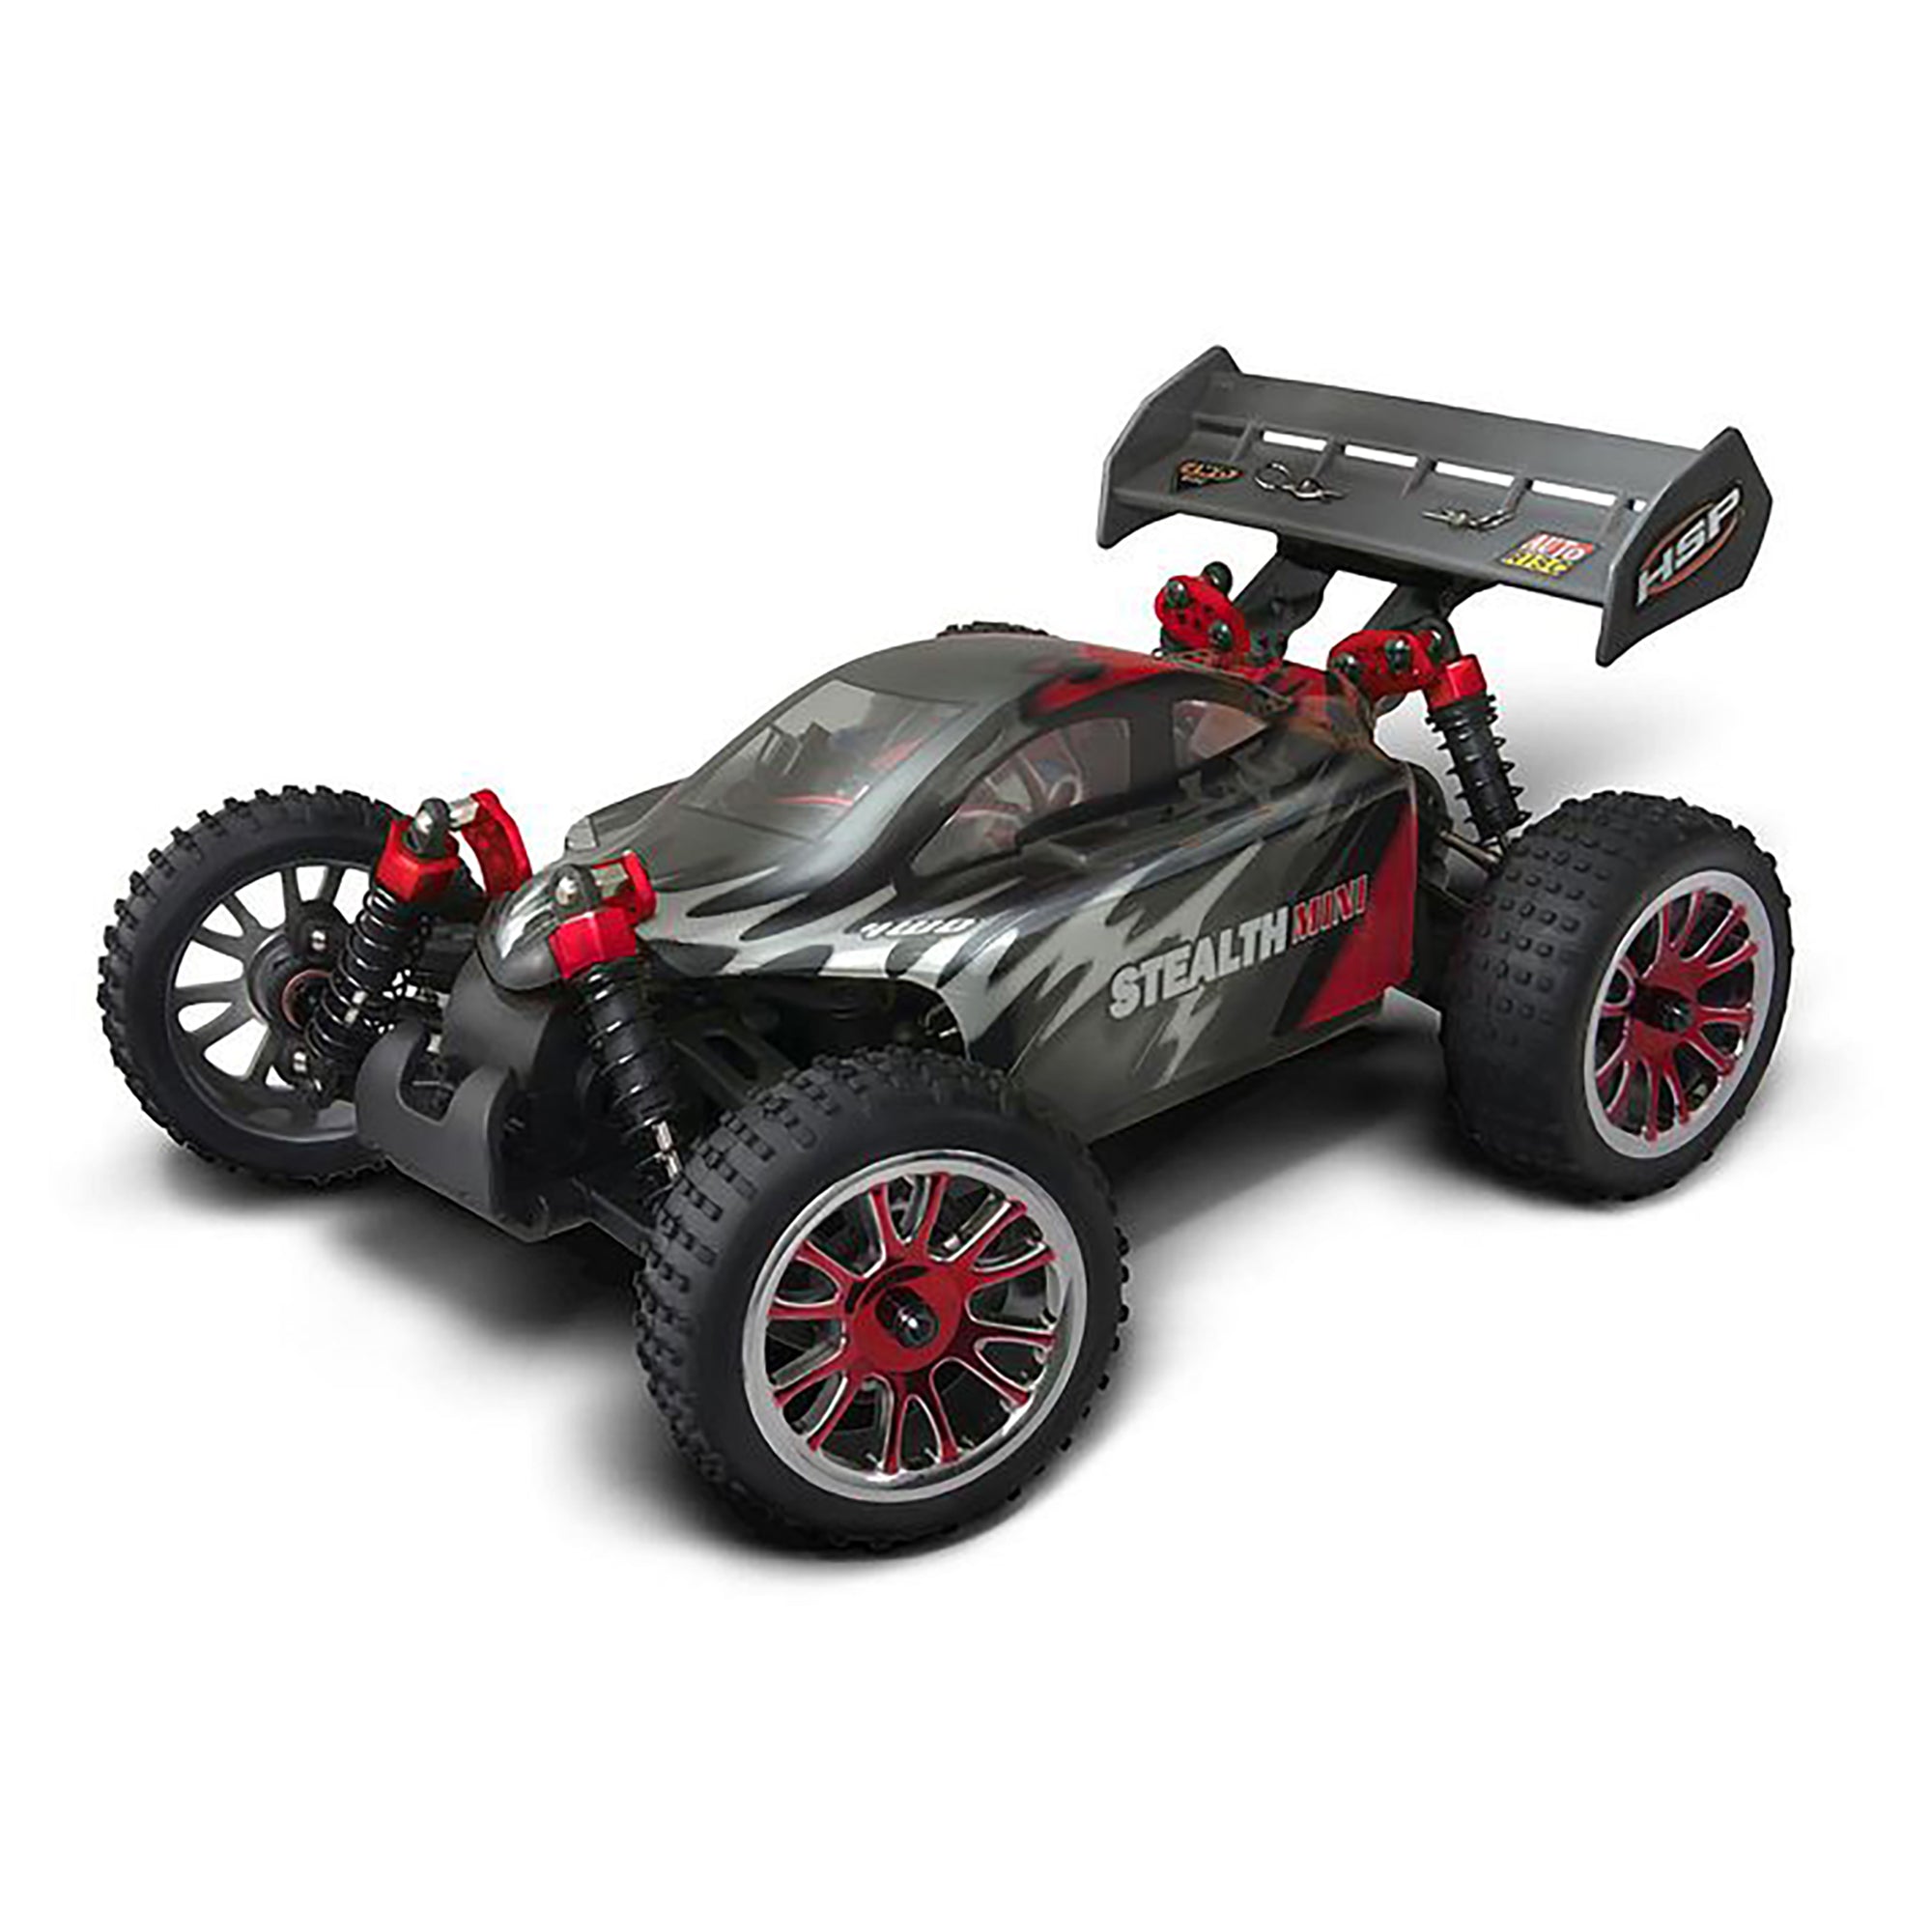 HSP Racing 94185-88801 Stealth Mini 2.4Ghz Electric 4WD Off Road RTR 1/16 Scale RC Buggy